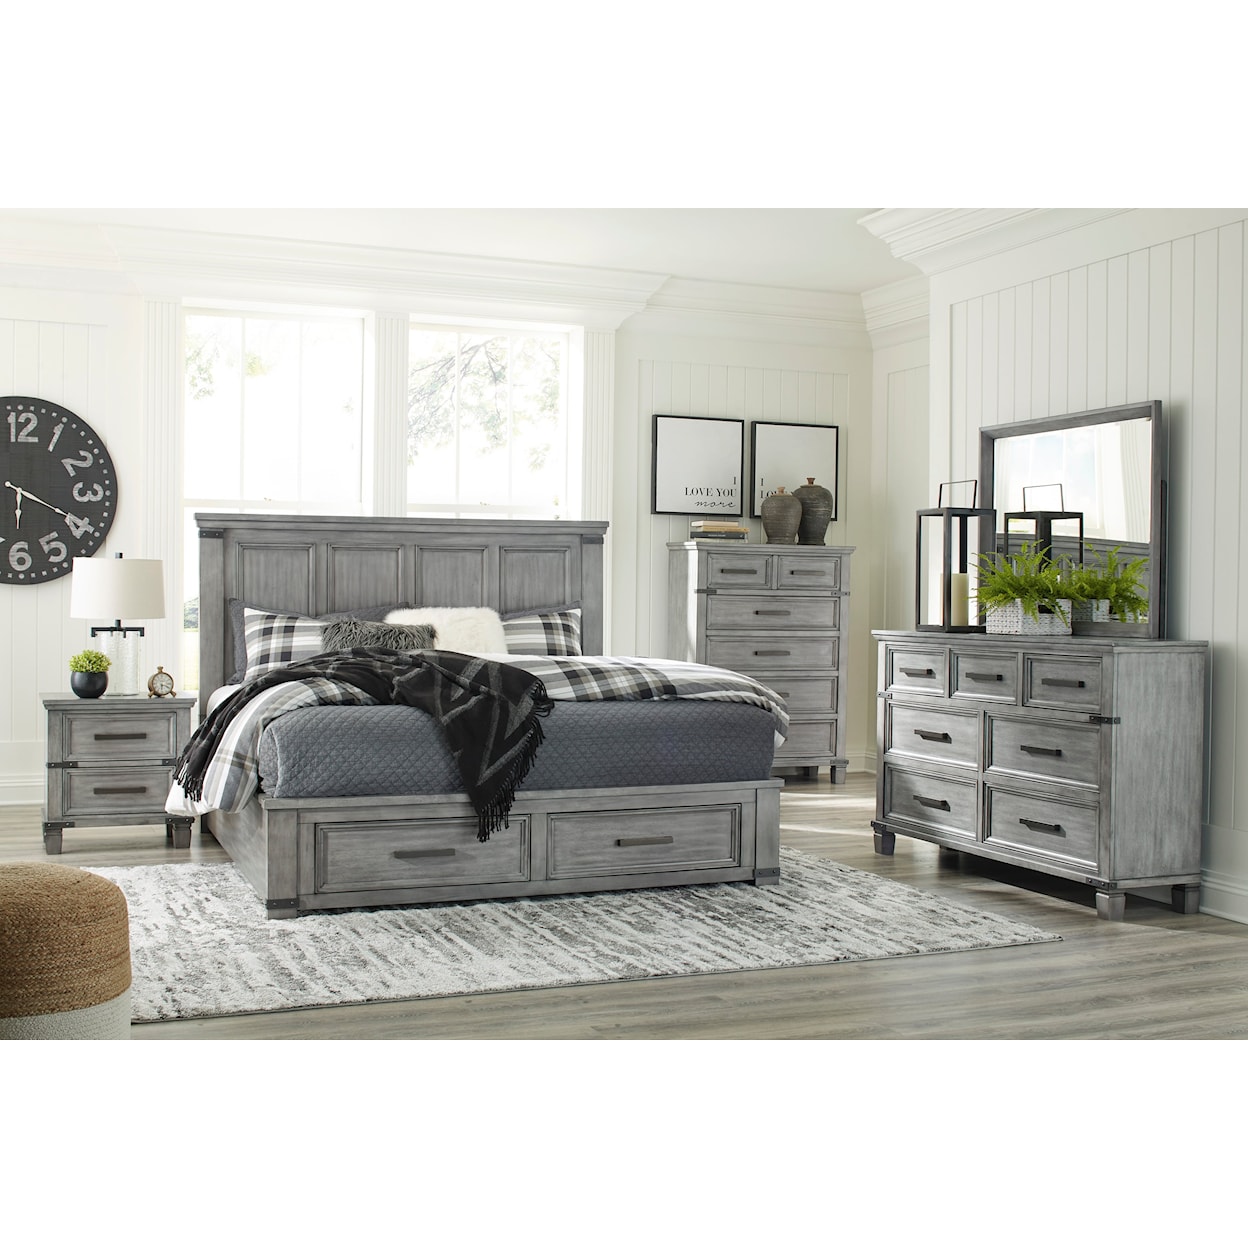 Signature Design by Ashley Russelyn California King Storage Bed